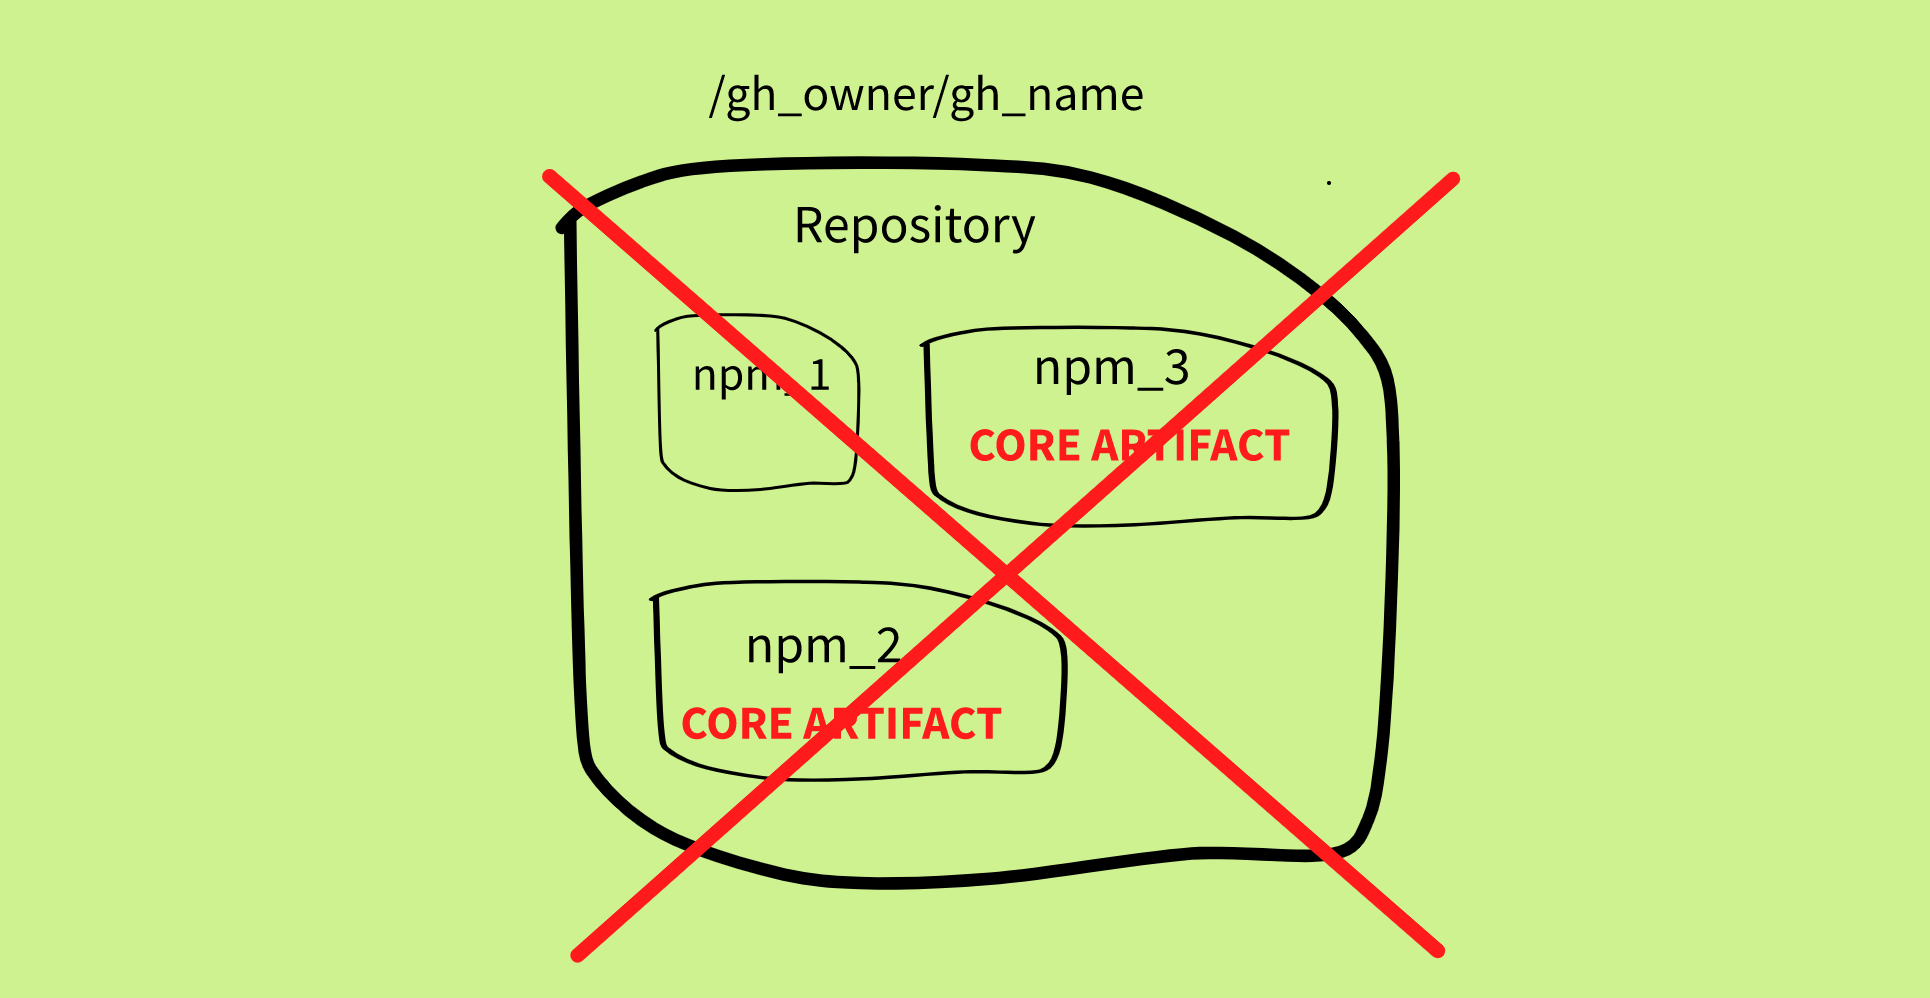 image illustrating relationship between a repostory and Moiva library